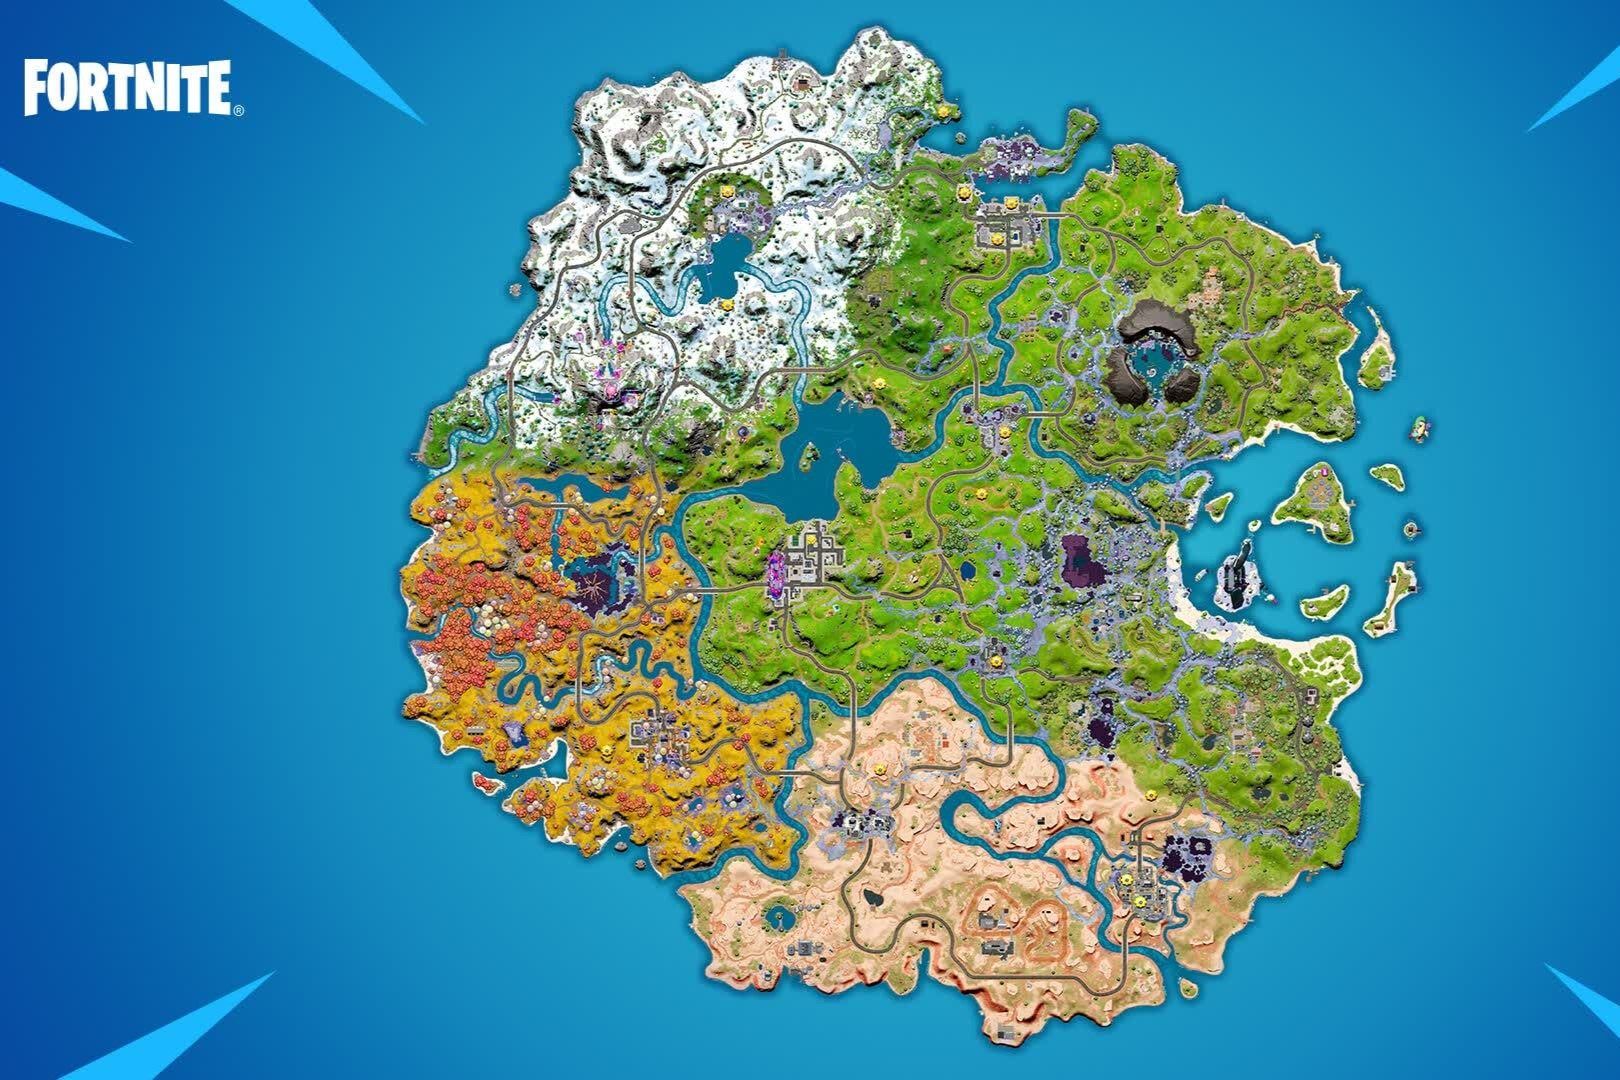 Has The Old OG Fortnite Map Made A Comeback? Here Is What We Know